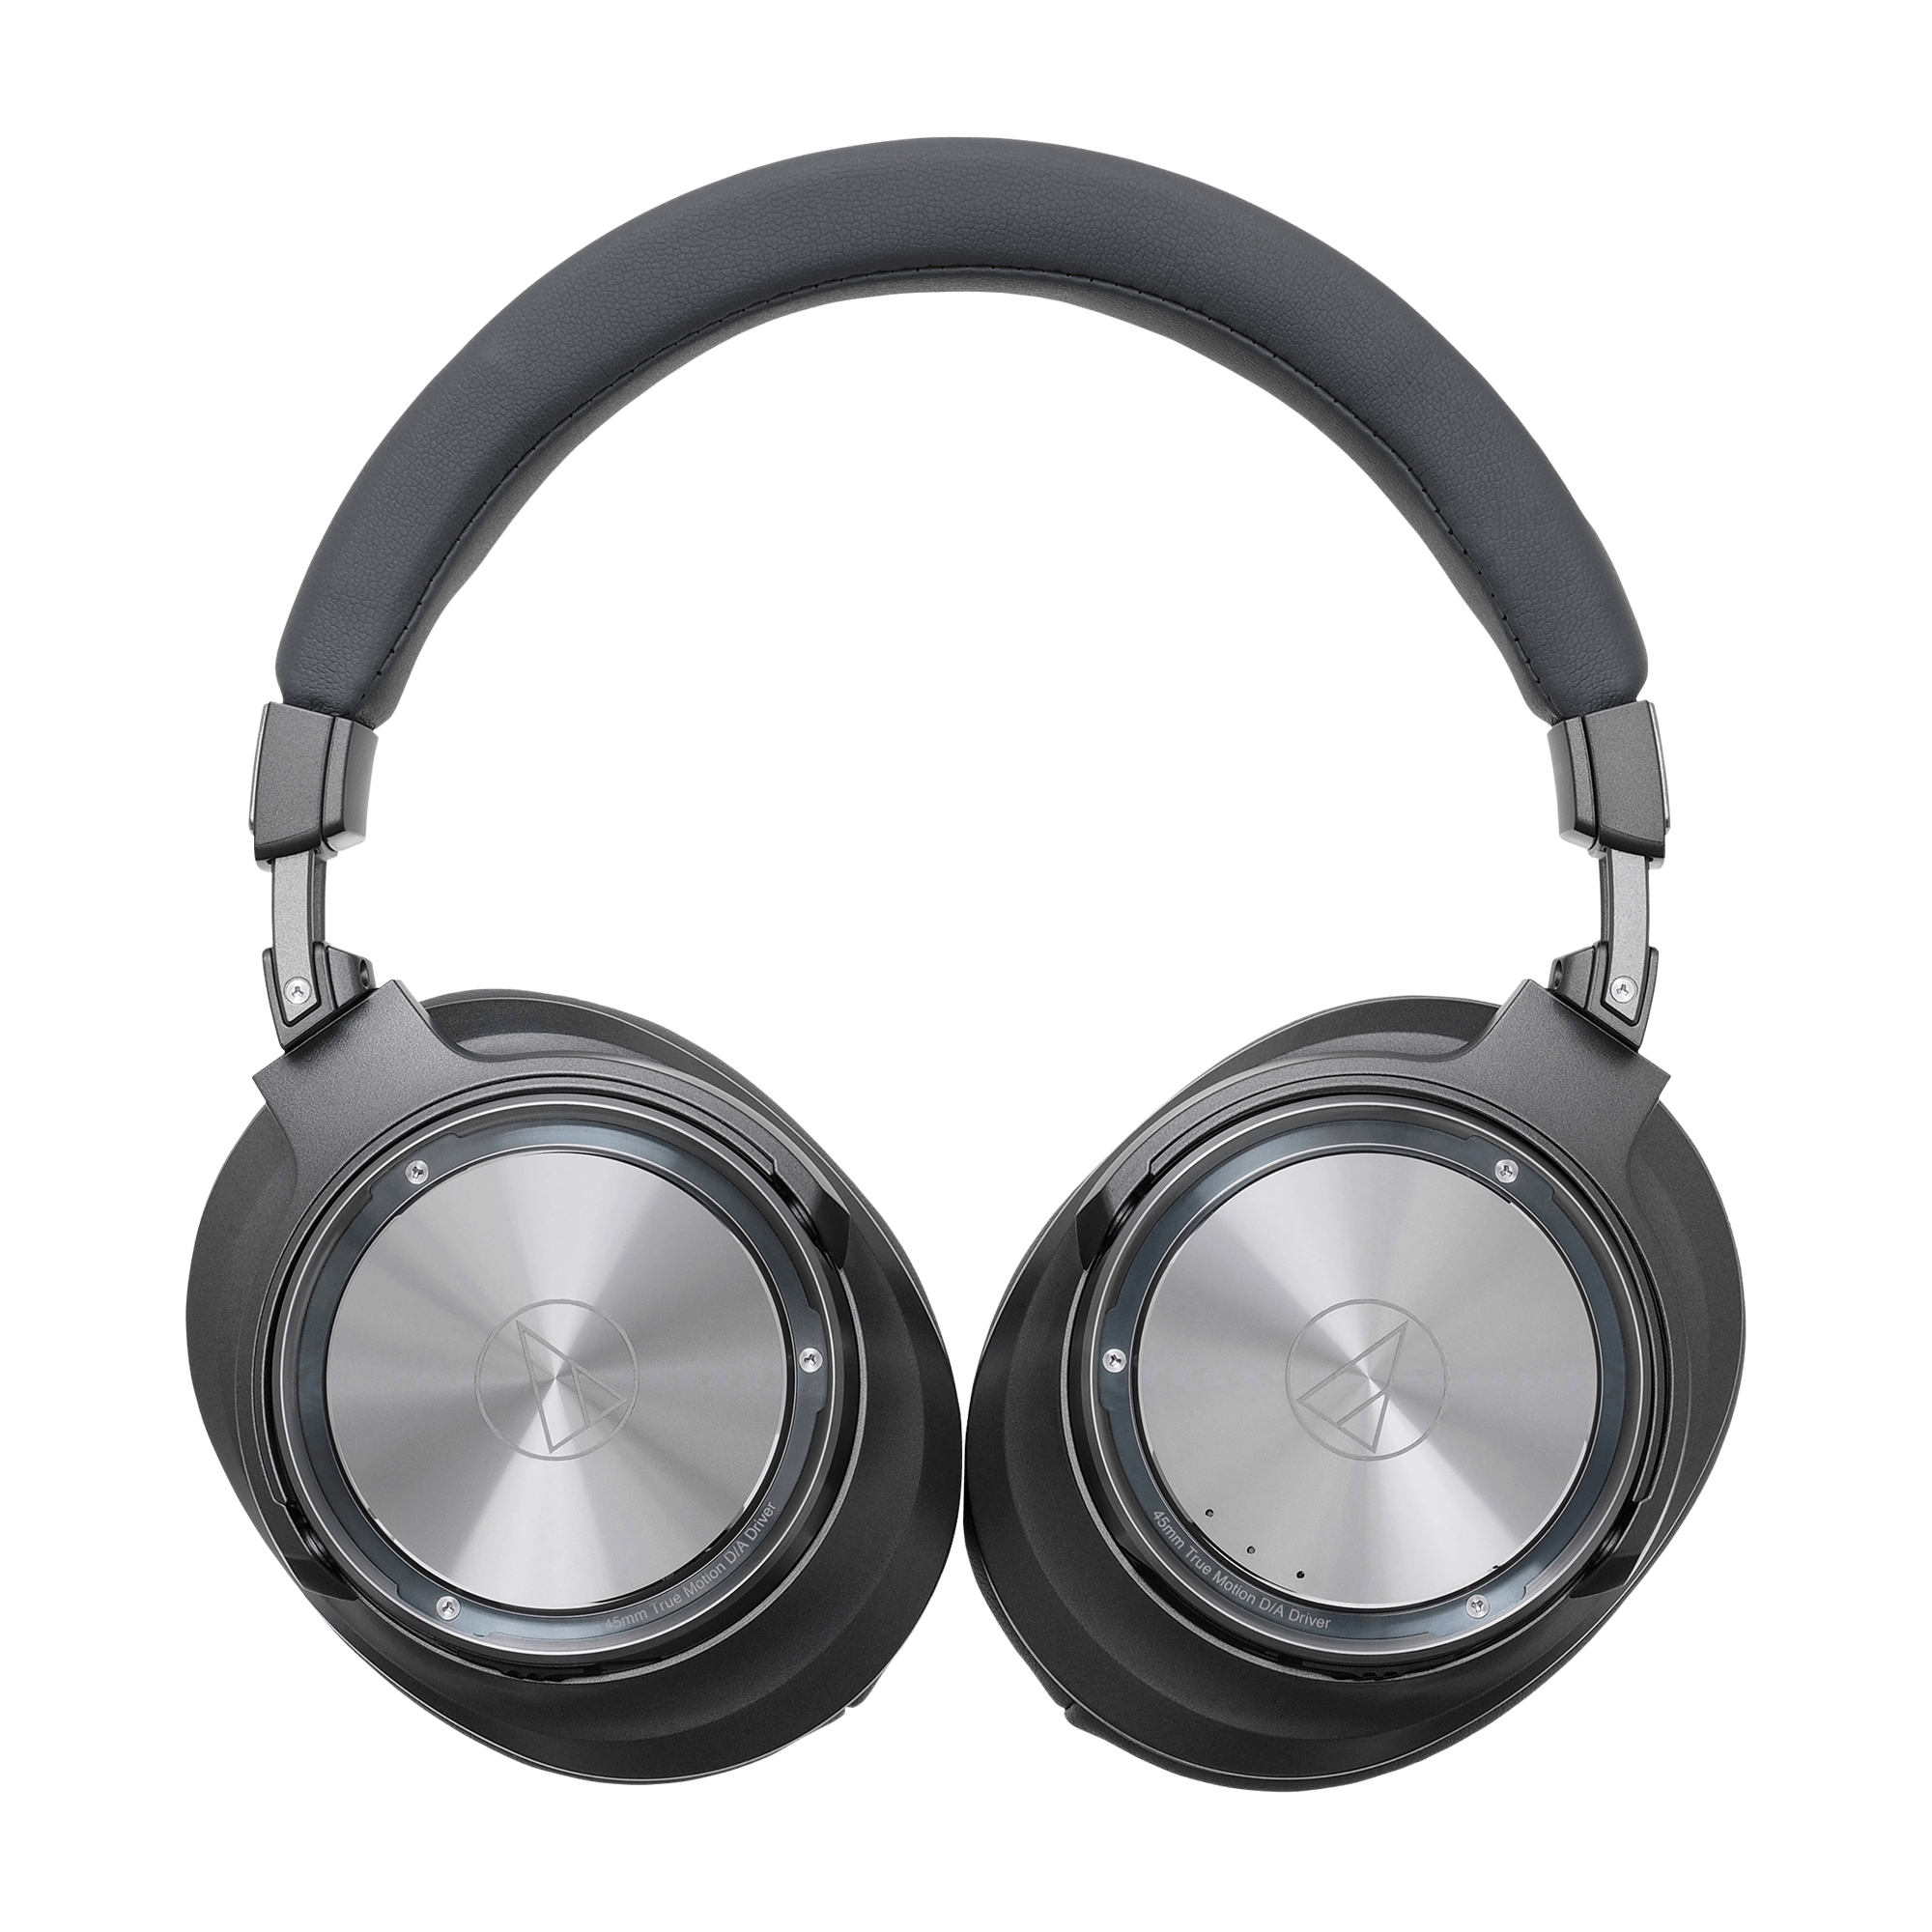 ATH-DSR9BTWireless Over-Ear Headphones with Pure Digital Drive